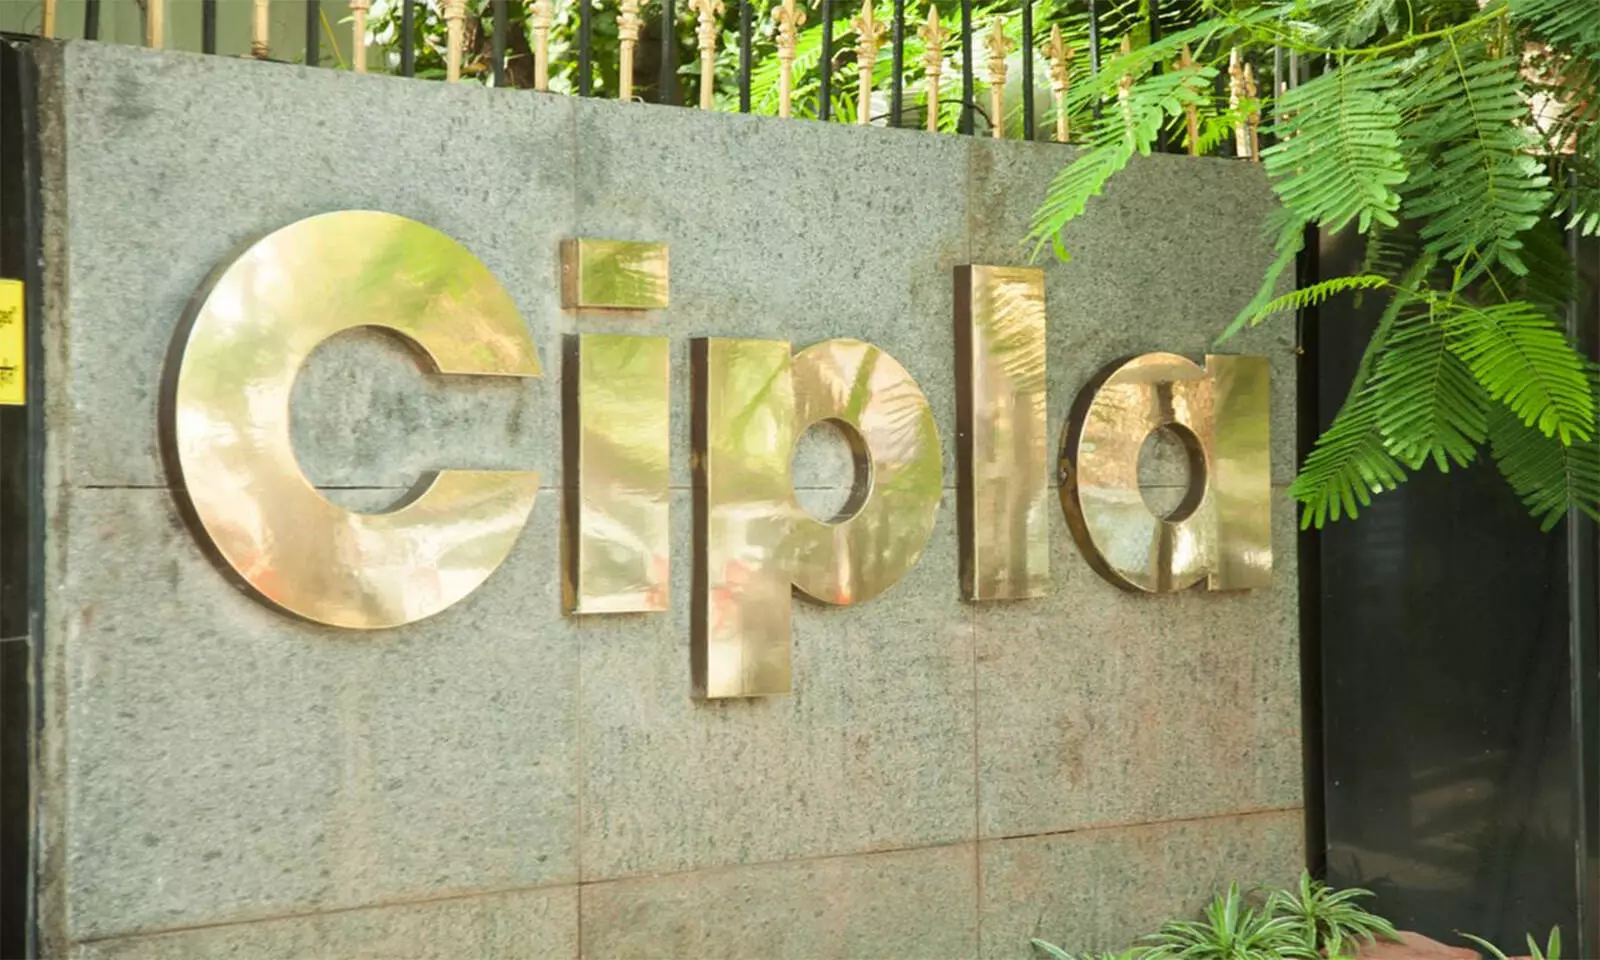 Cipla to invest Rs 498 crore in Pithampur under Aatma Nirbharbharata drive: Report